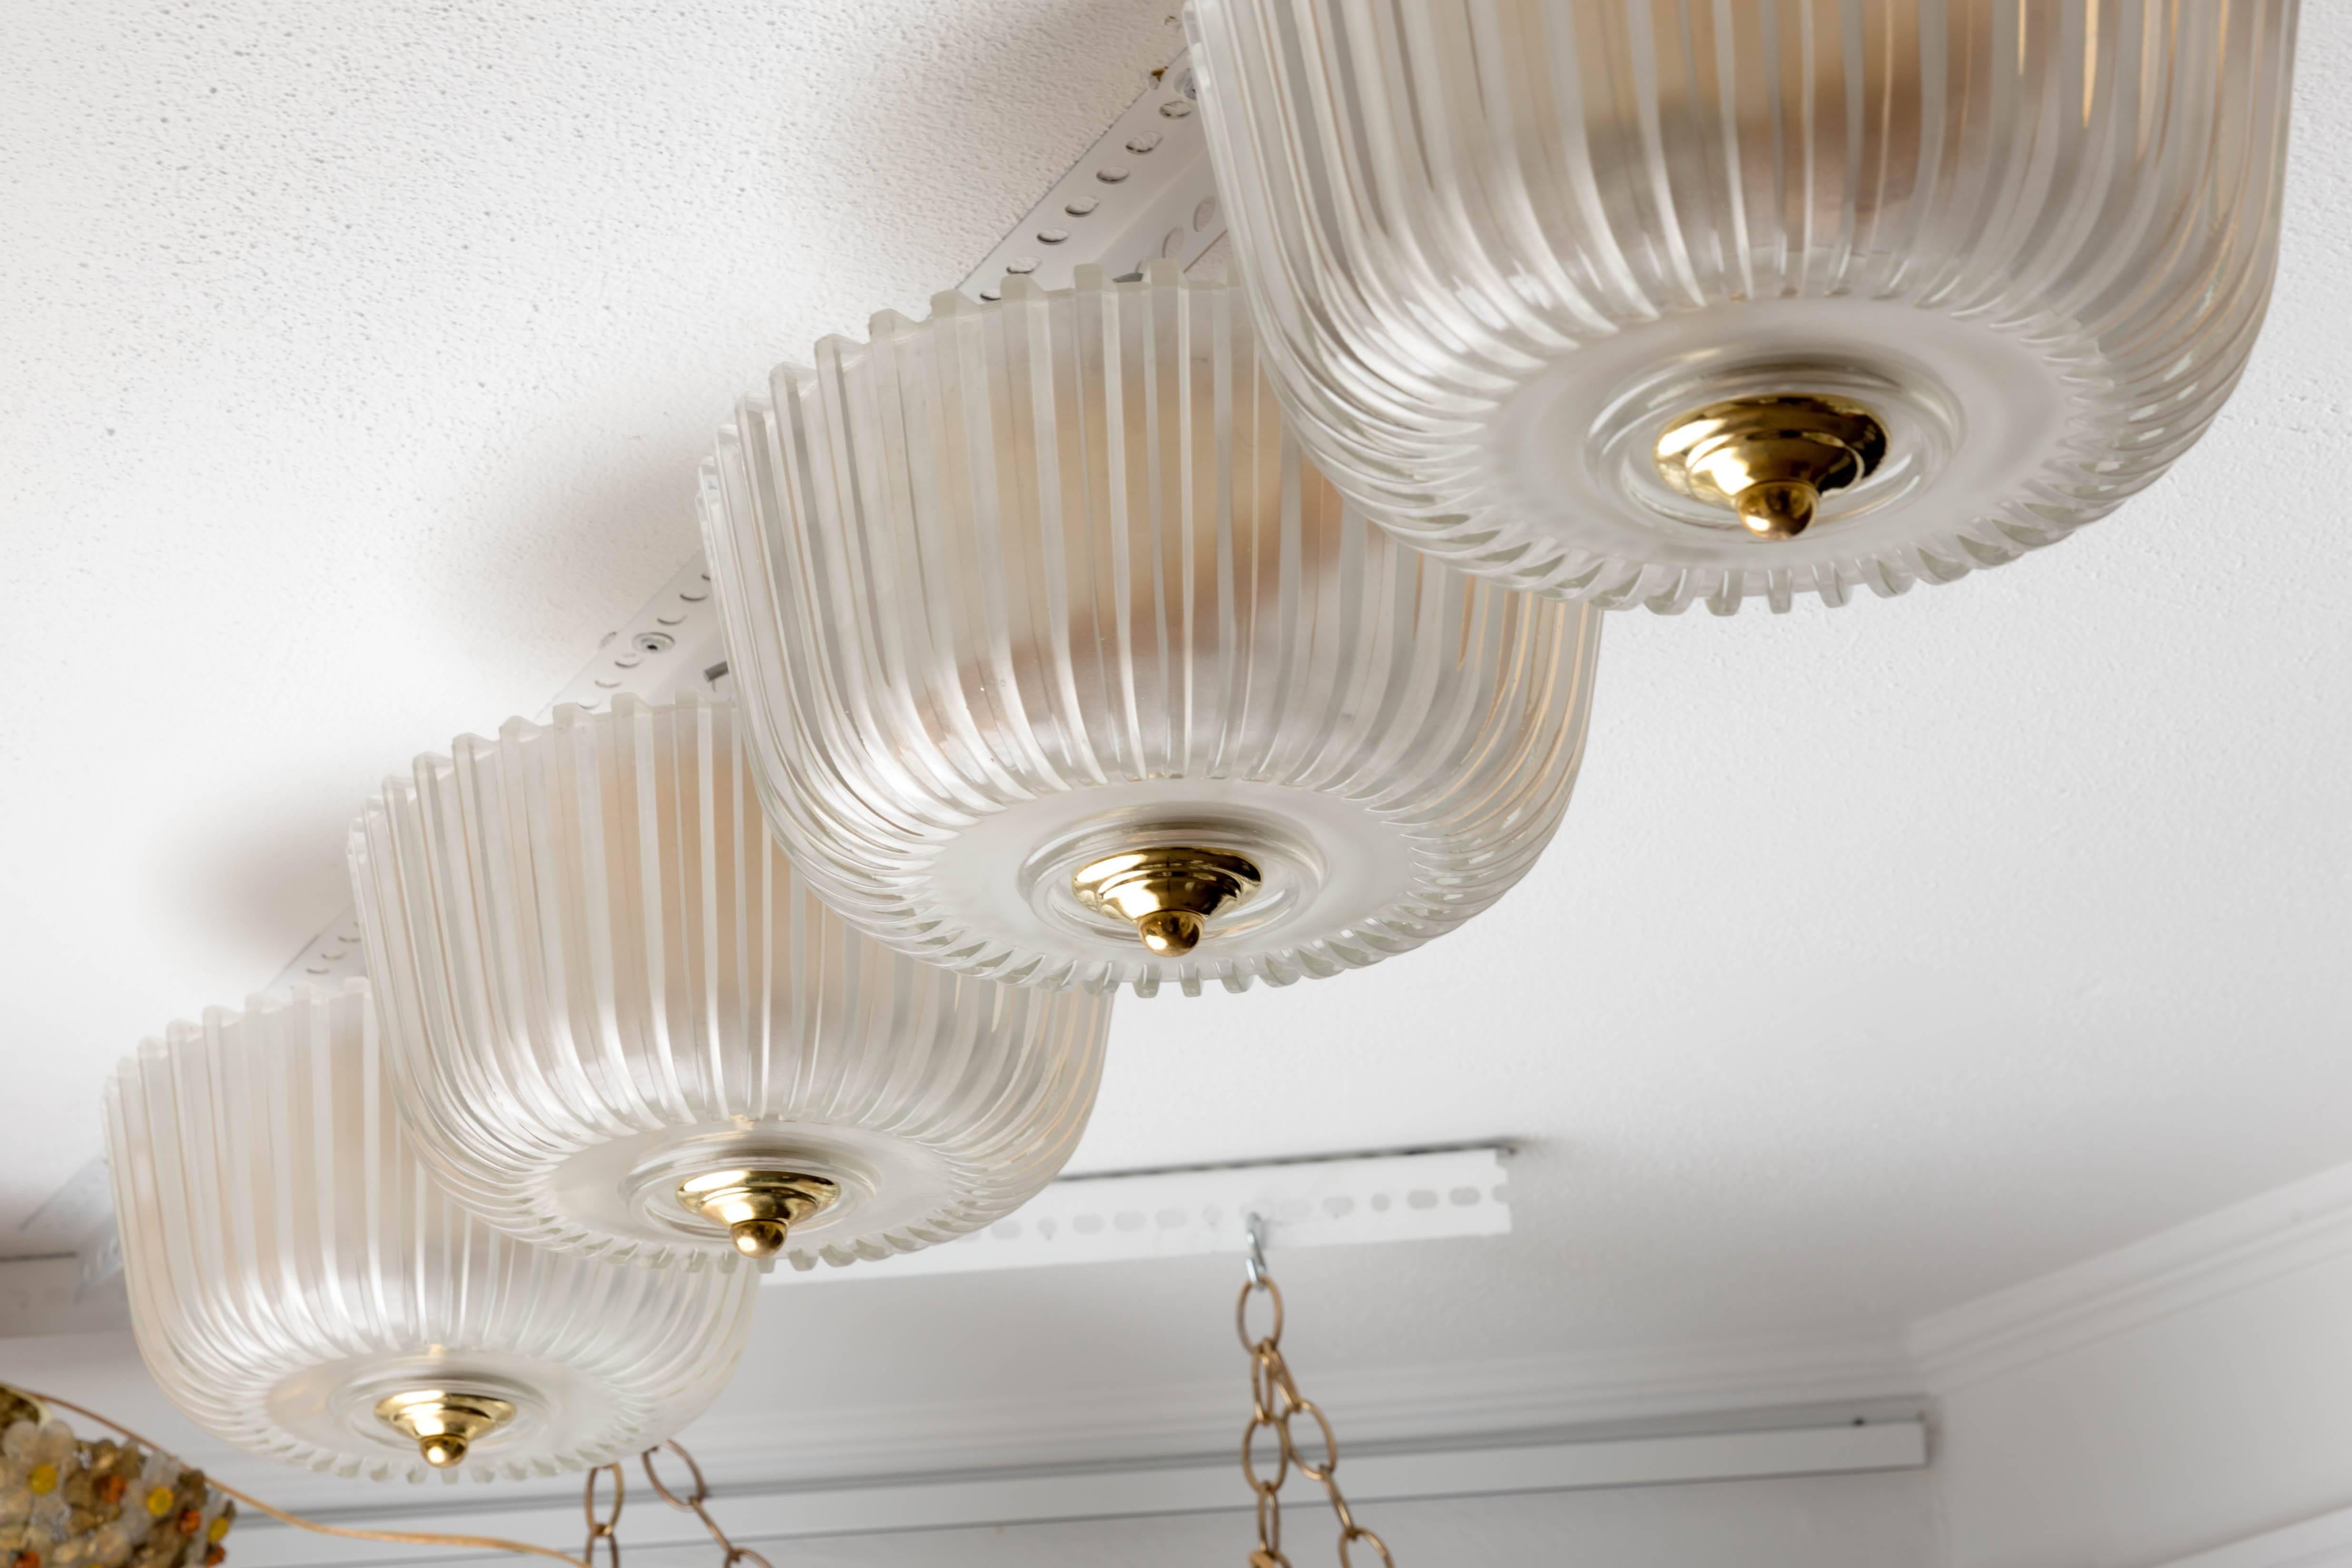 Fluted frosted glass flush mount ceiling fixture with brass detail.